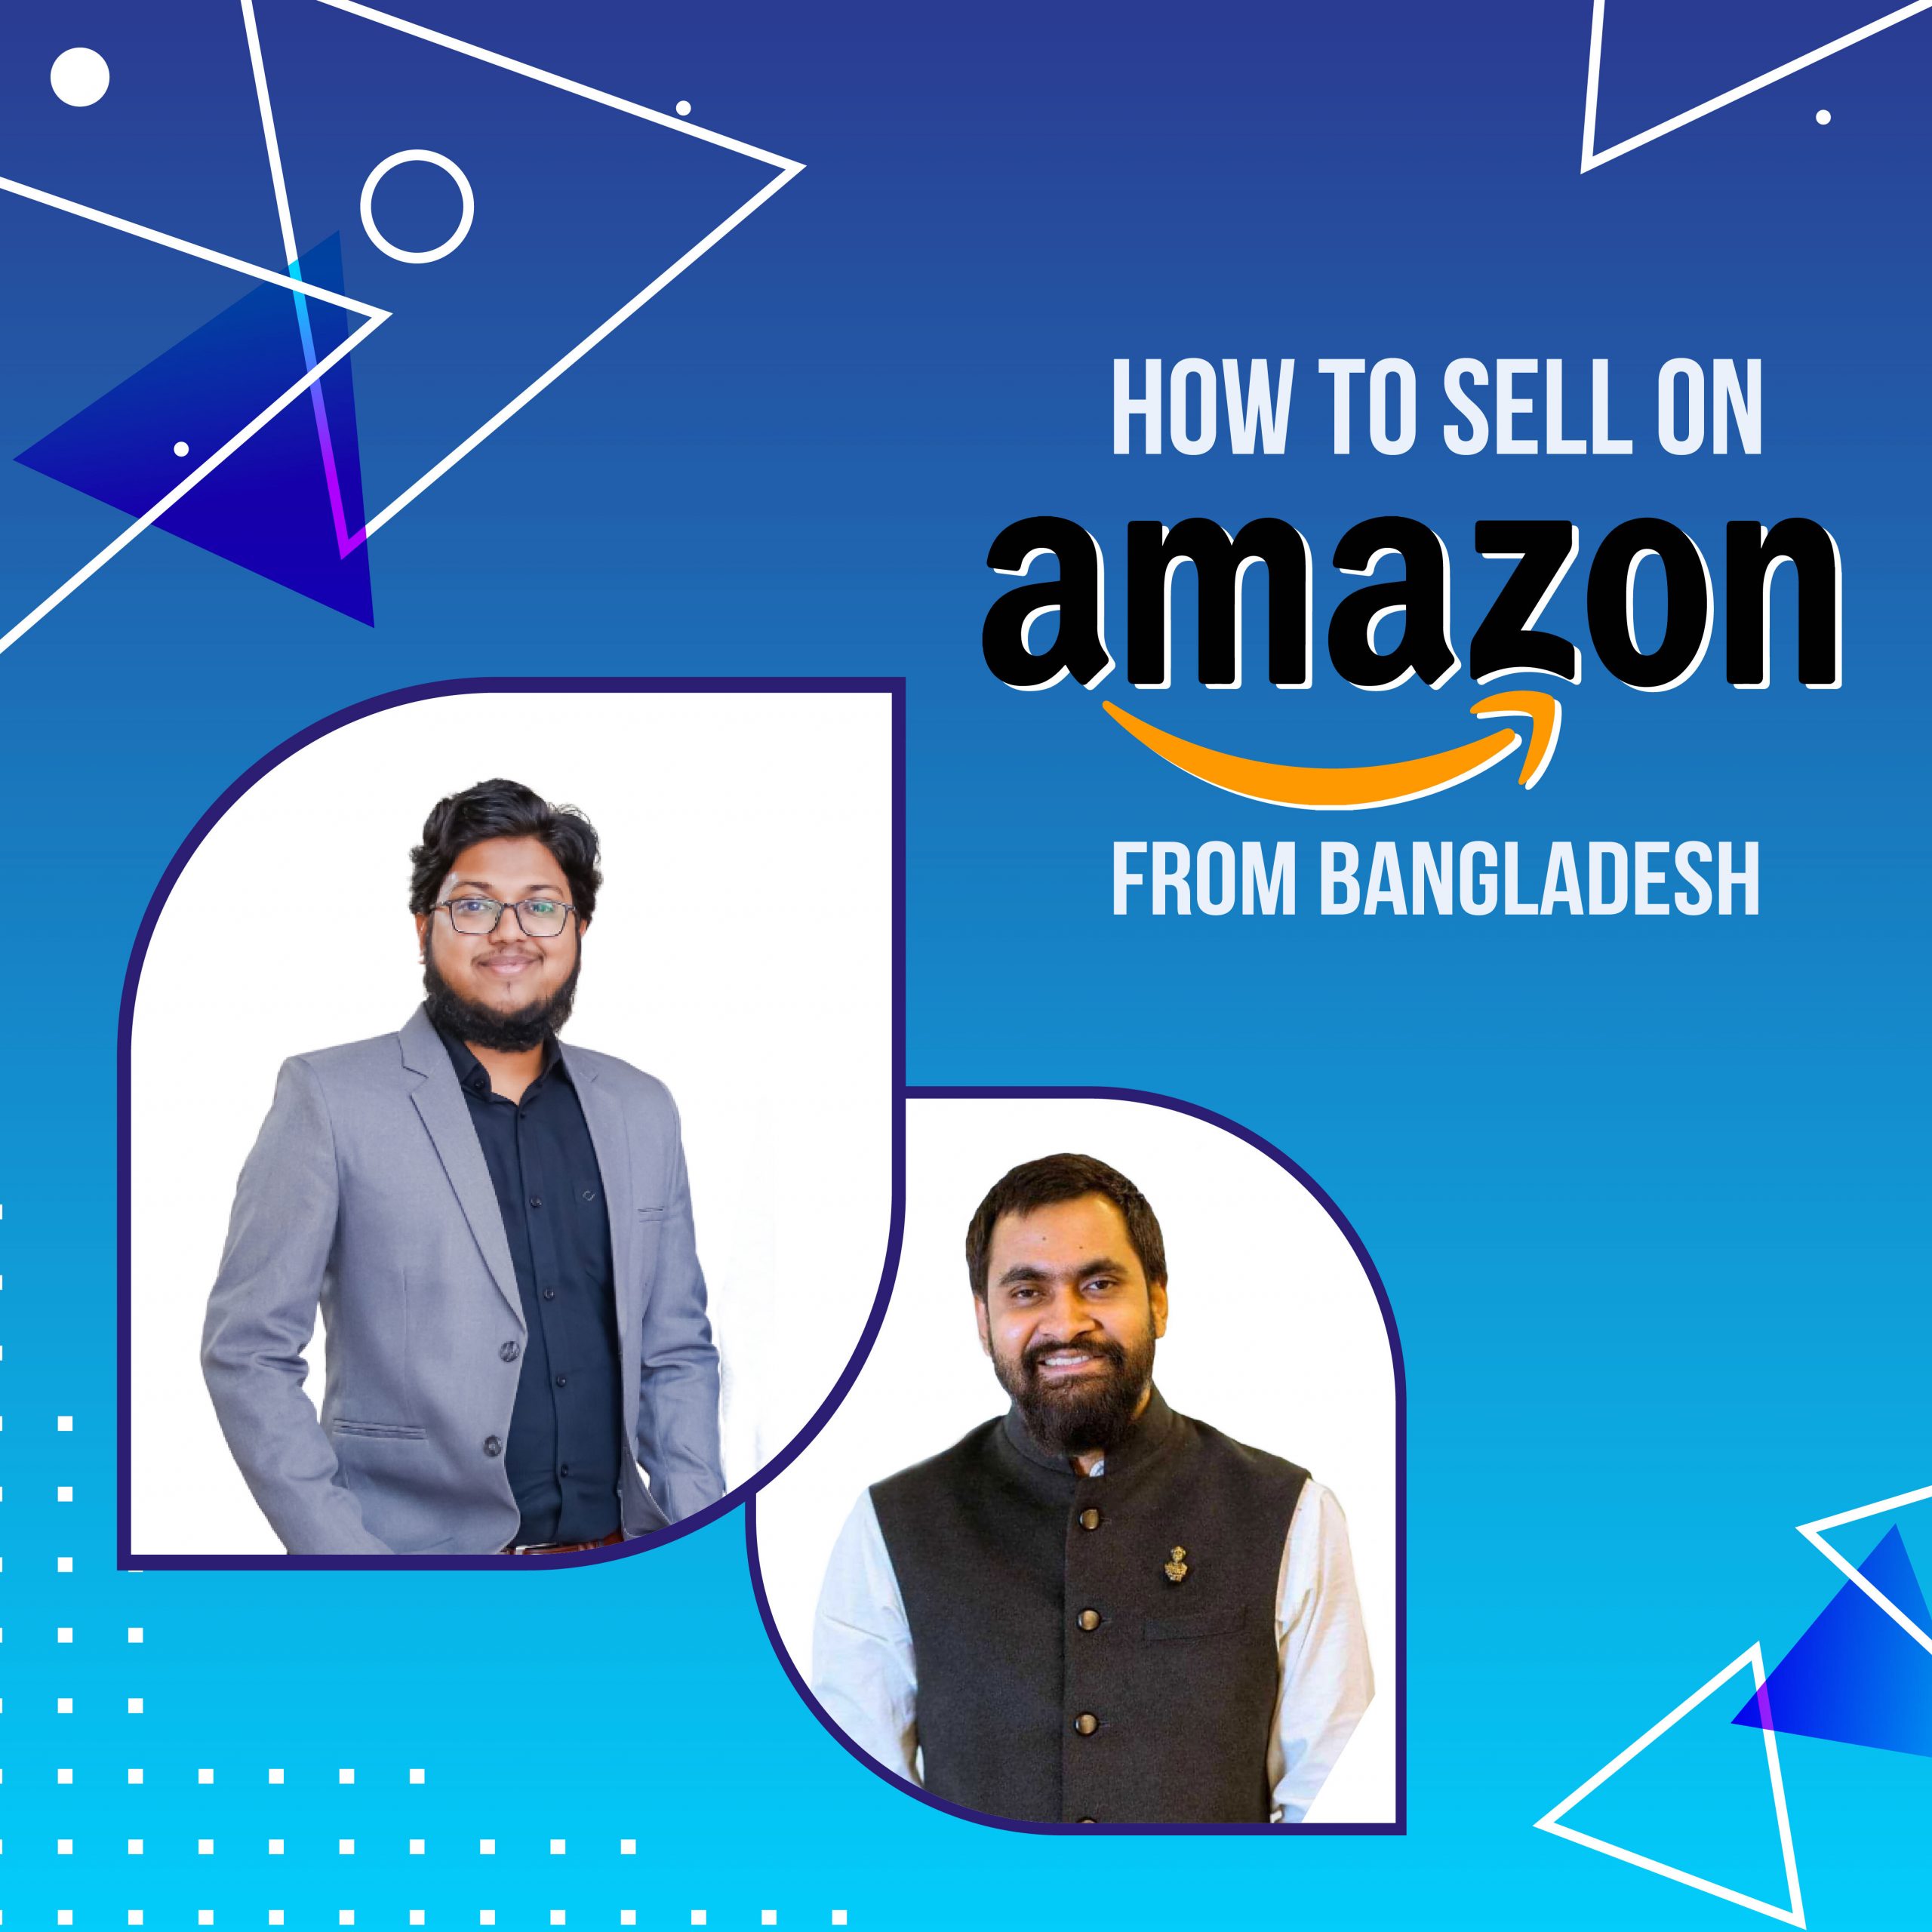 How to Sell on Amazon Products From Bangladesh